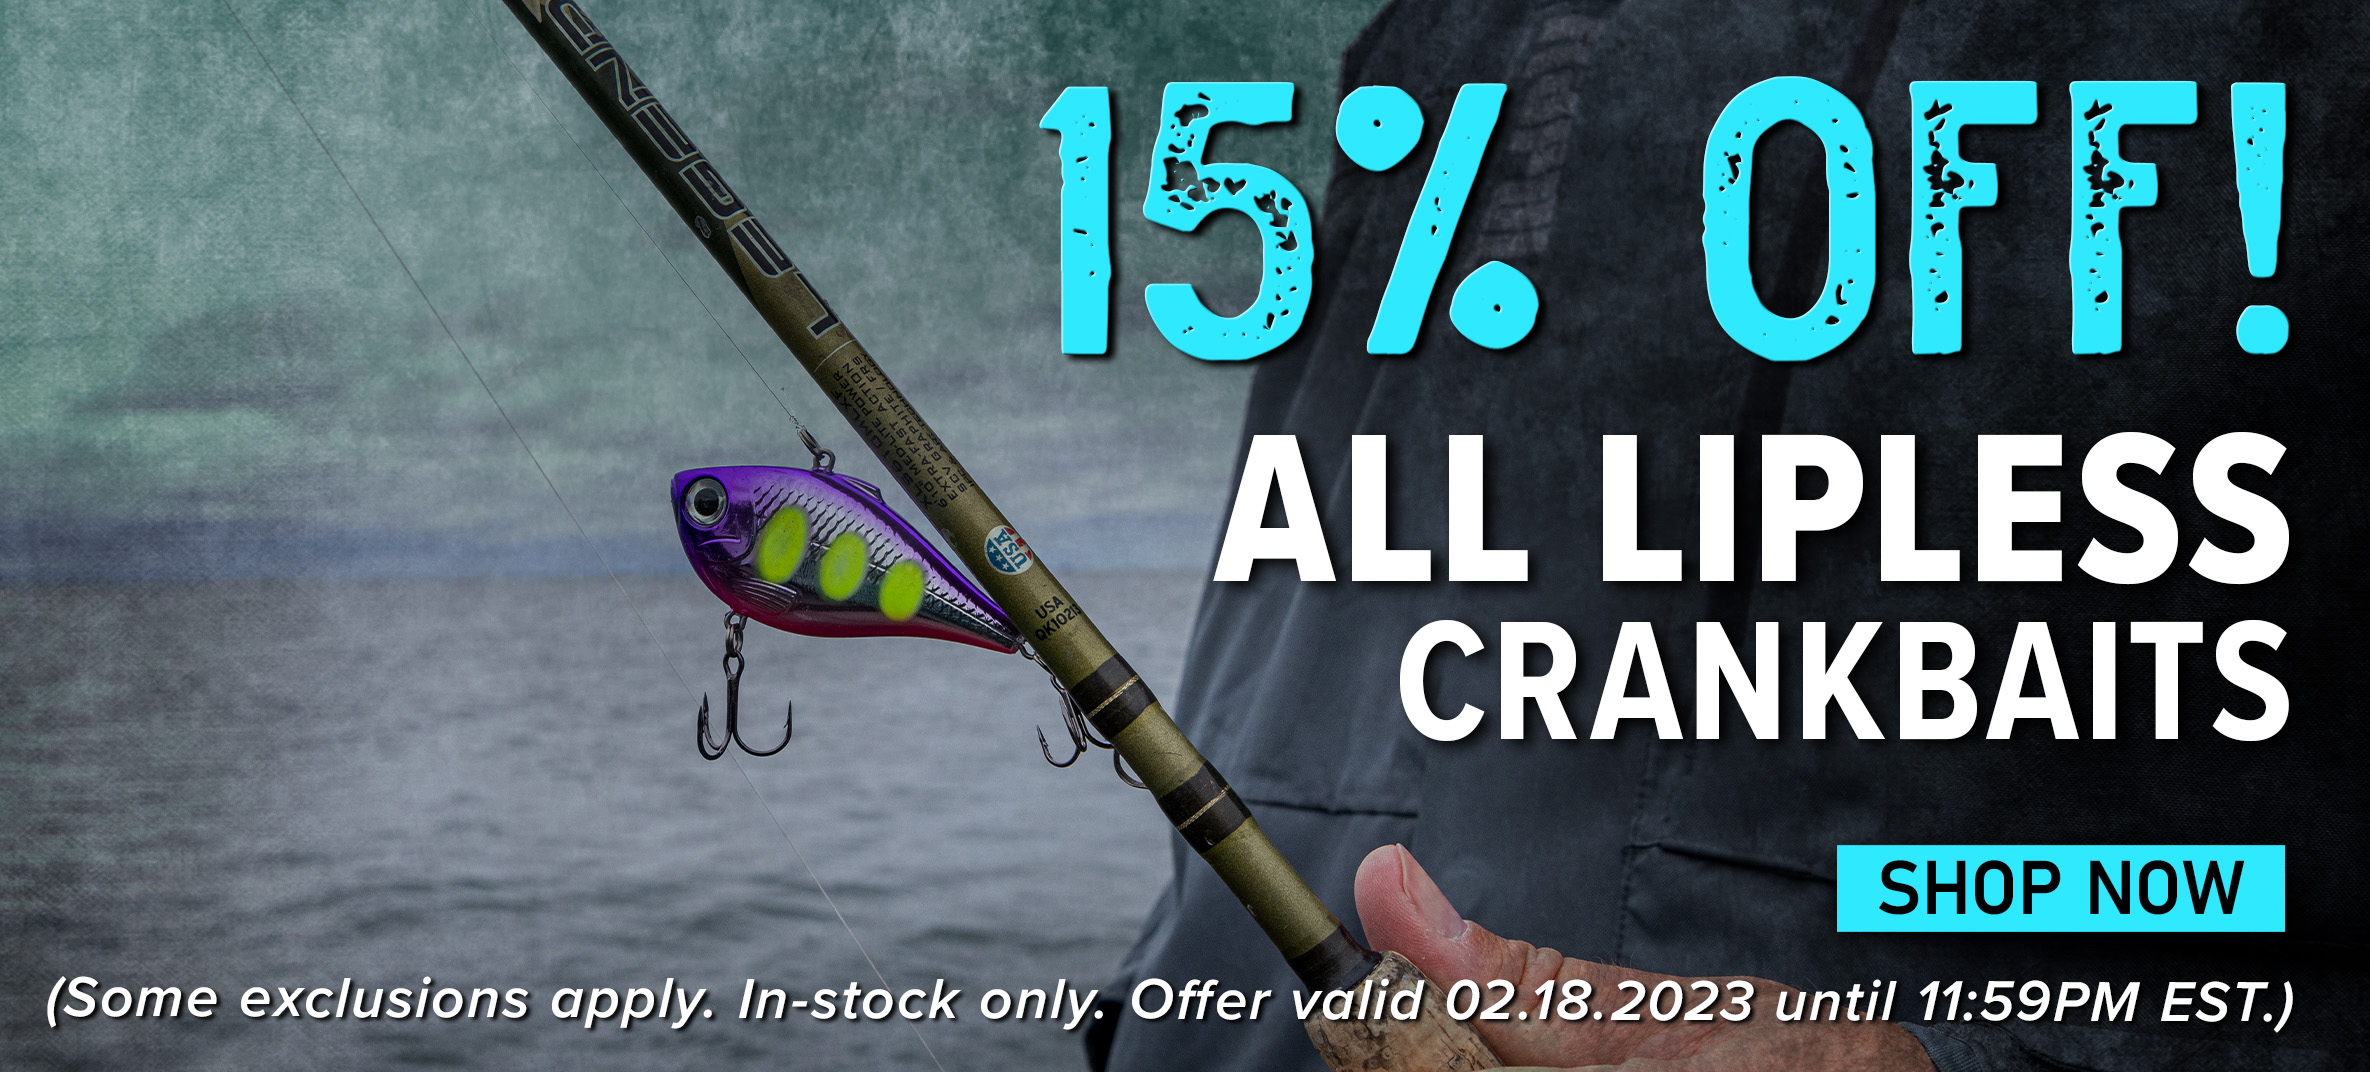 15% Off! All Lipless Crankbaits Shop Now (Some exclusions apply. In-stock only. Offer valid 02.18.2023 until 11:59PM EST.) EYAiE S Ll g R . CRANKBAITS SHOP NOW 